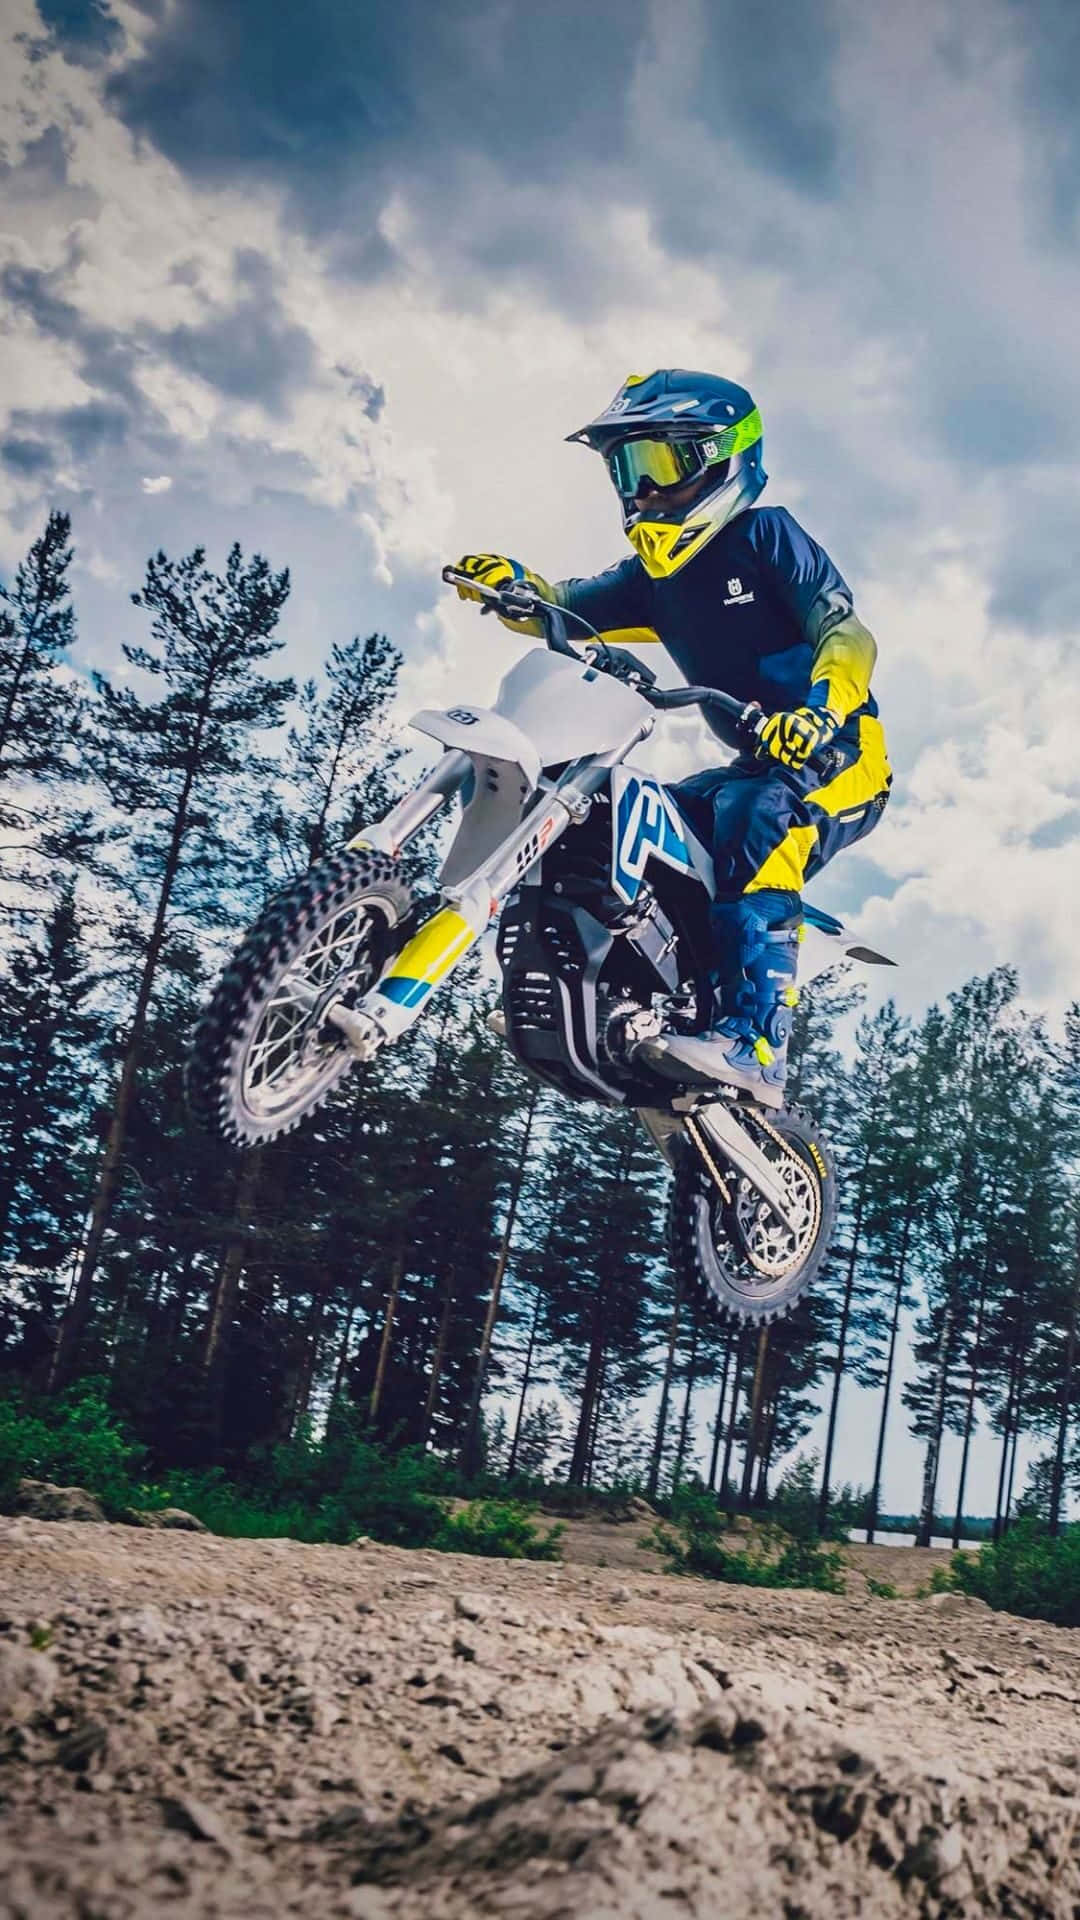 Jump over the competition with a Honda Dirt Bike! Wallpaper